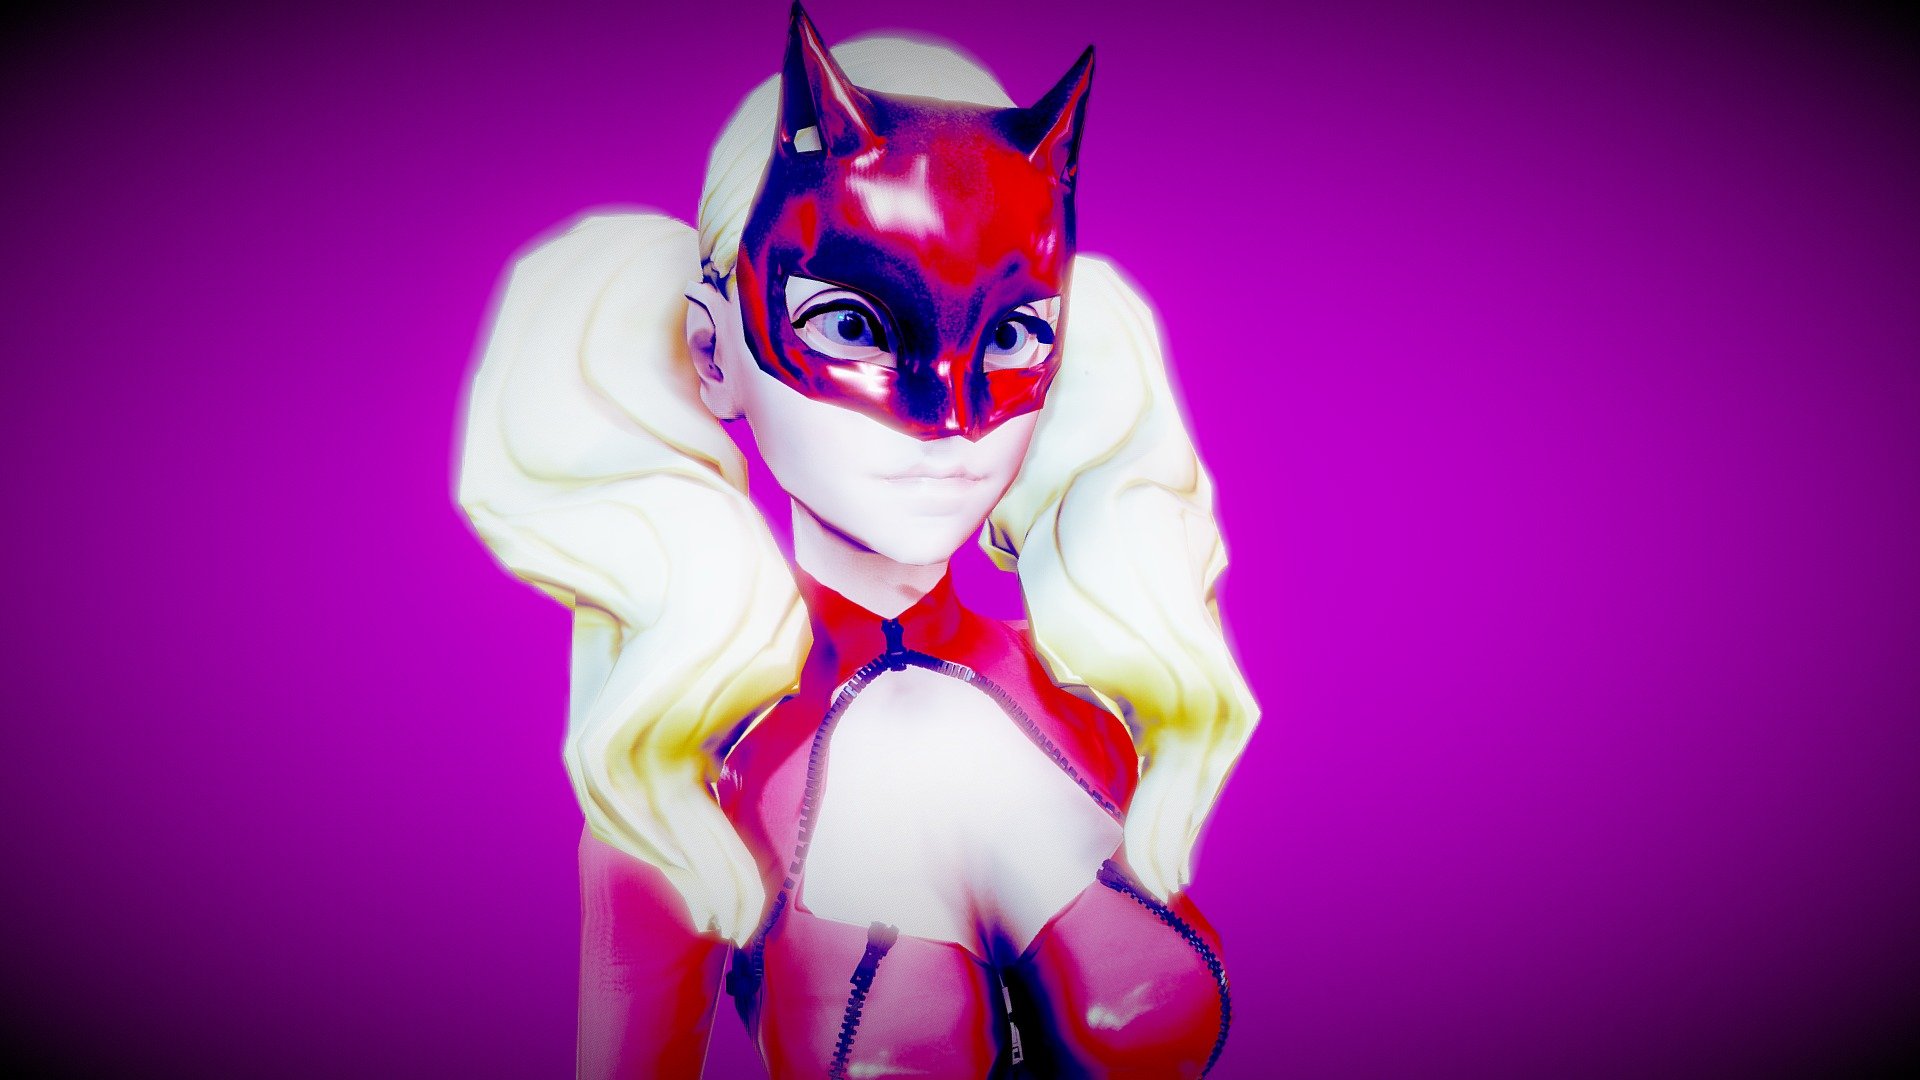 Ann Takamaki from persona 5 royal

with 6 mixamo animation - Persona 5 Ann Takamaki - 3D model by DiegoVega 3d model